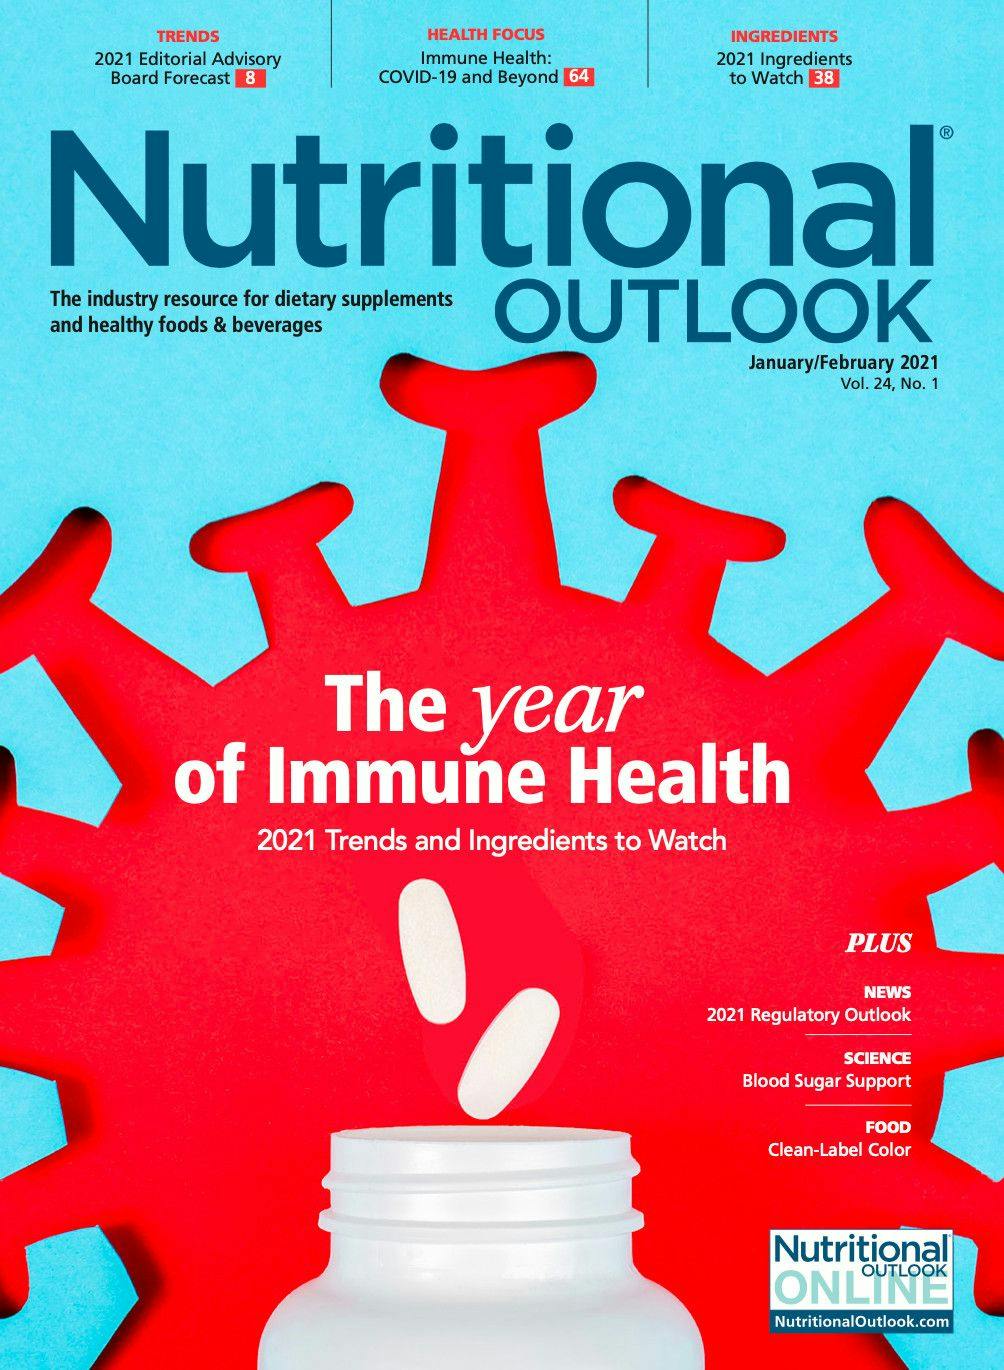 Nutritional Outlook Vol. 24 No. 1